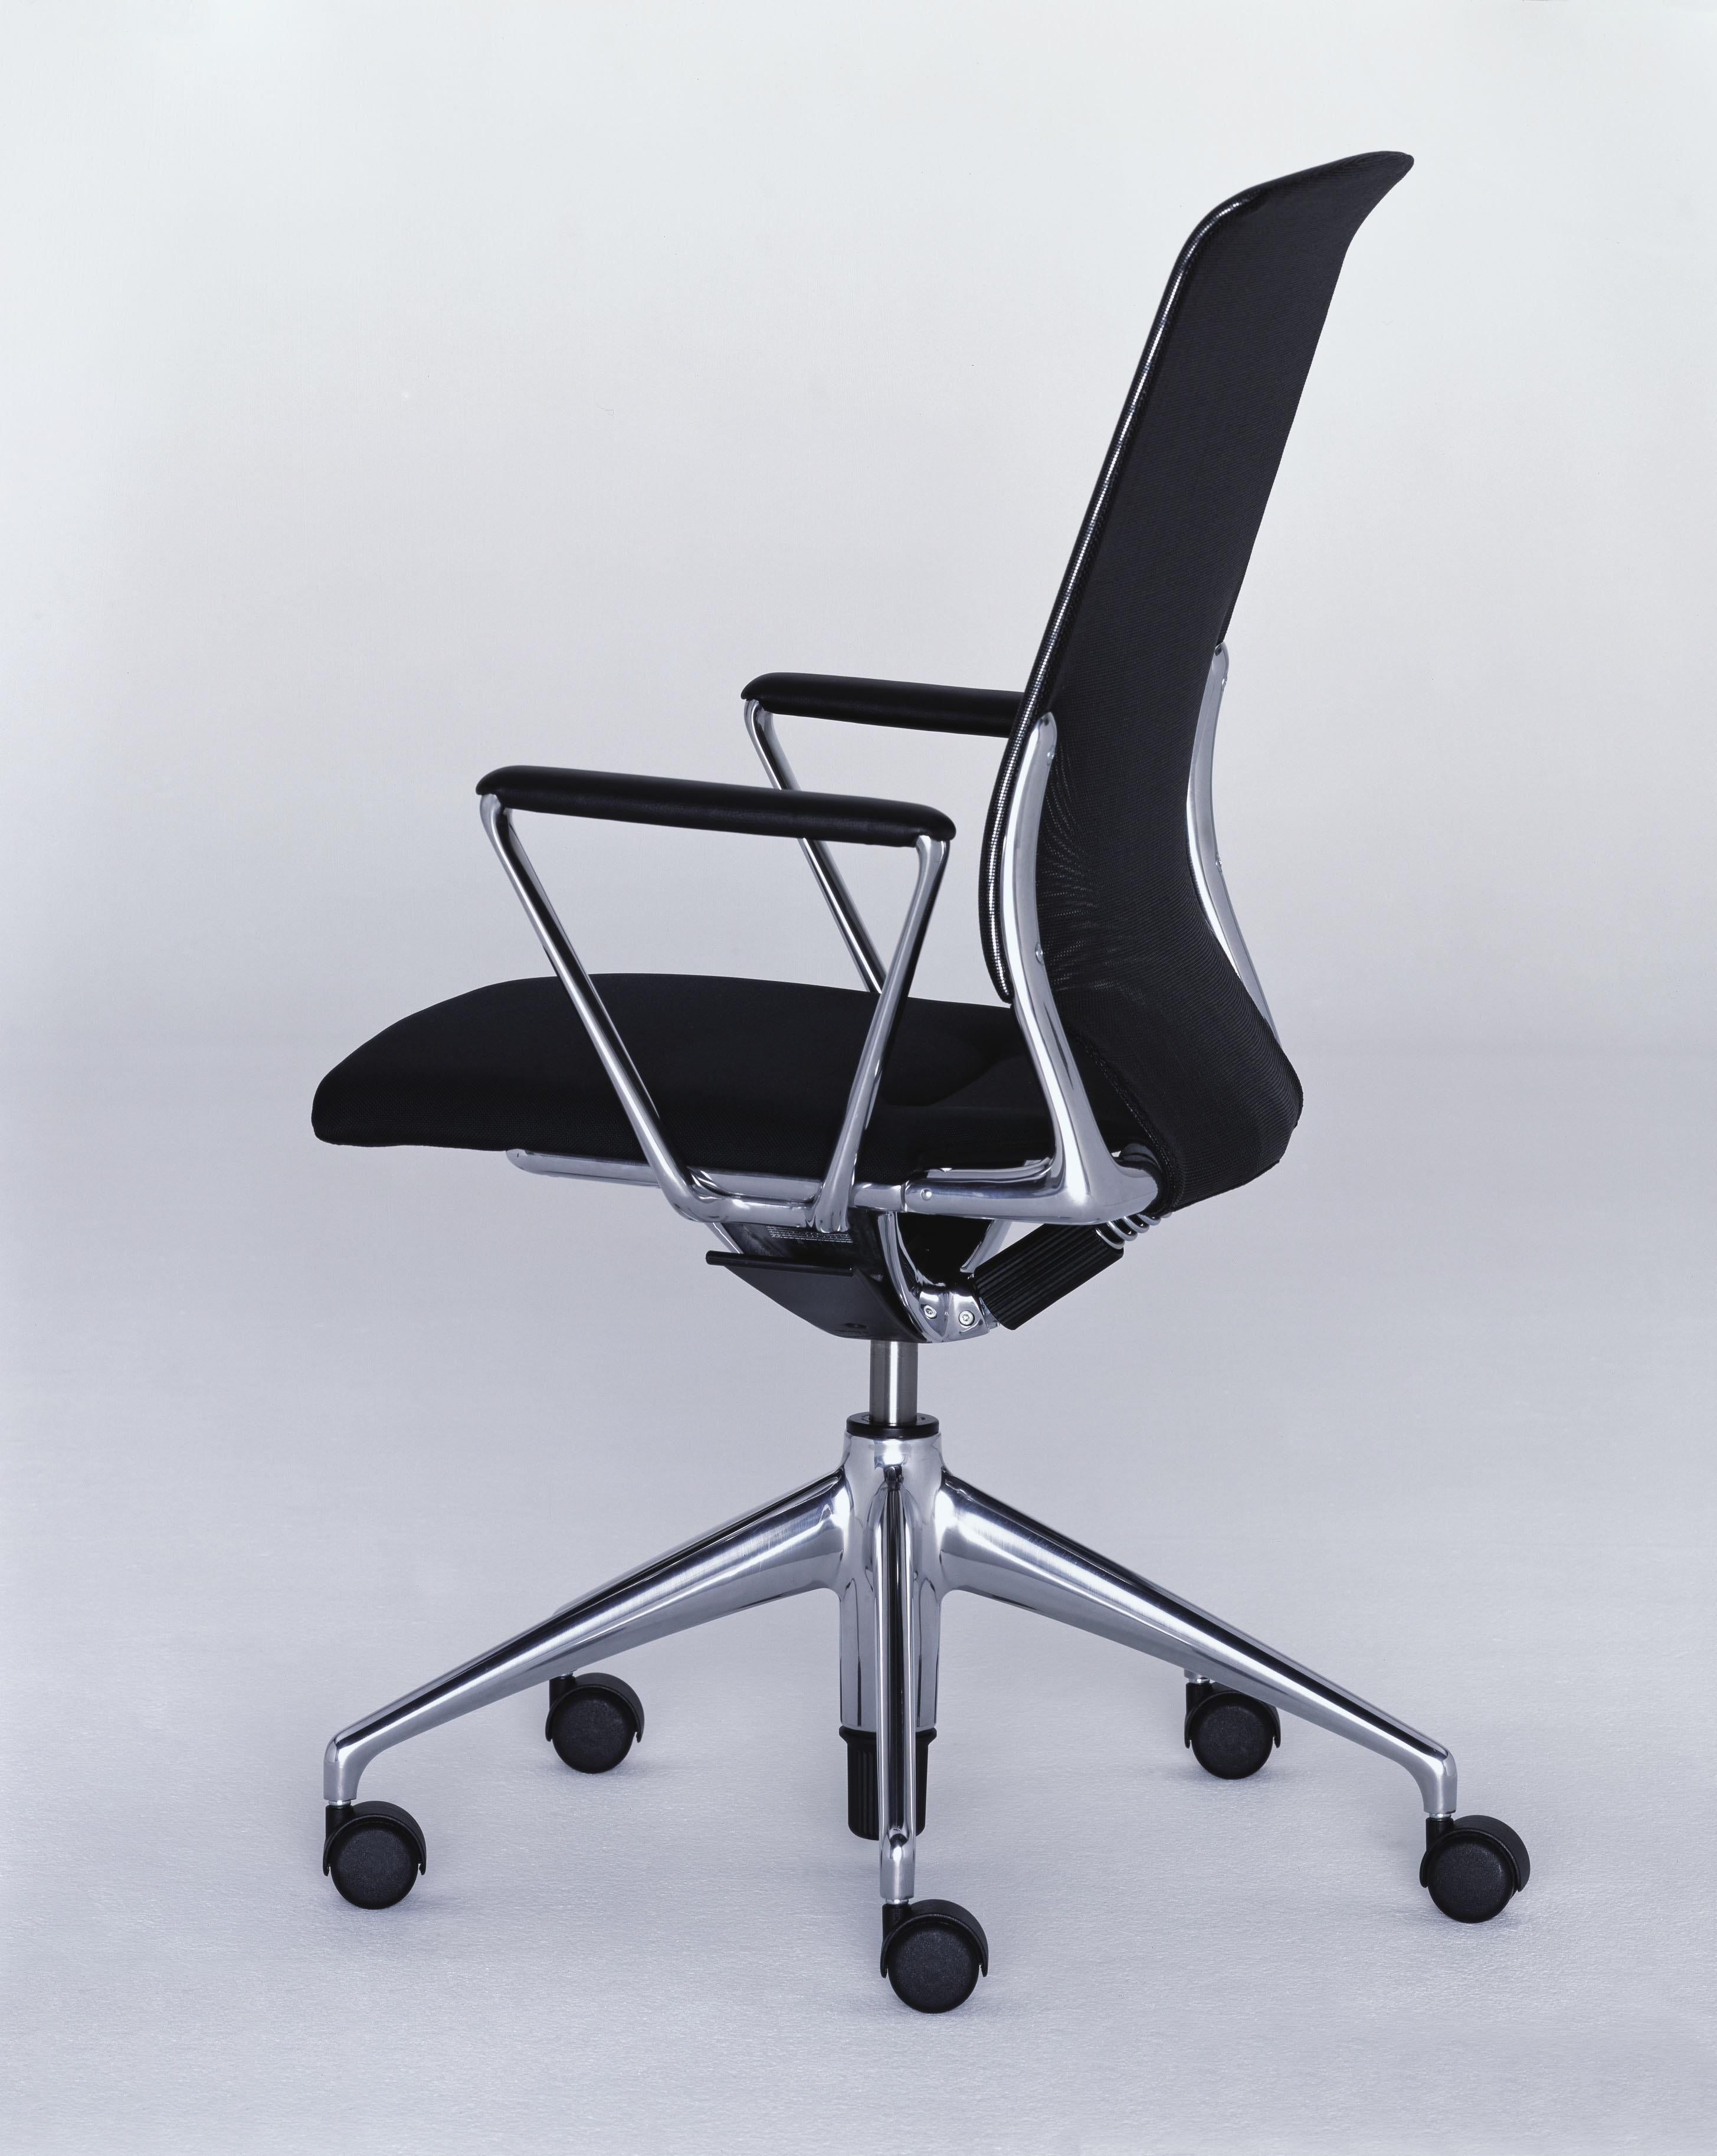 These items are currently only available in the United States.

Meda Chair embodies the successful combination of comfort, technology and elegant aesthetics. As with all his products, Alberto Meda‘s work on the Meda Chair was influenced by his